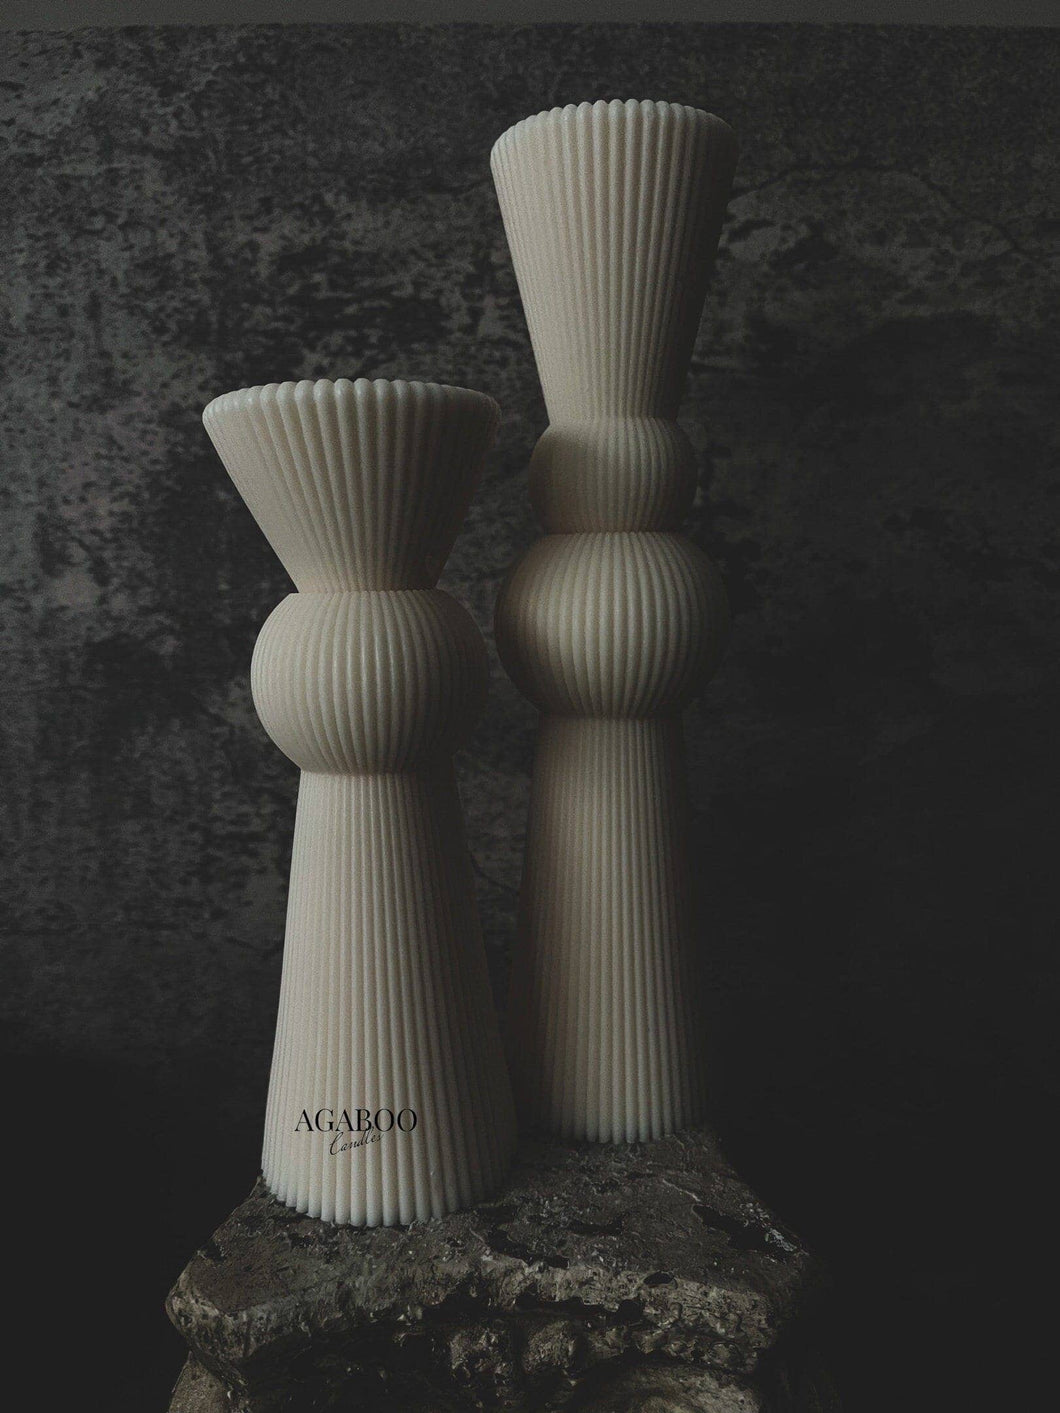 Agaboo Candle - Roman Ribbed Pillar Candle: Peach / Large